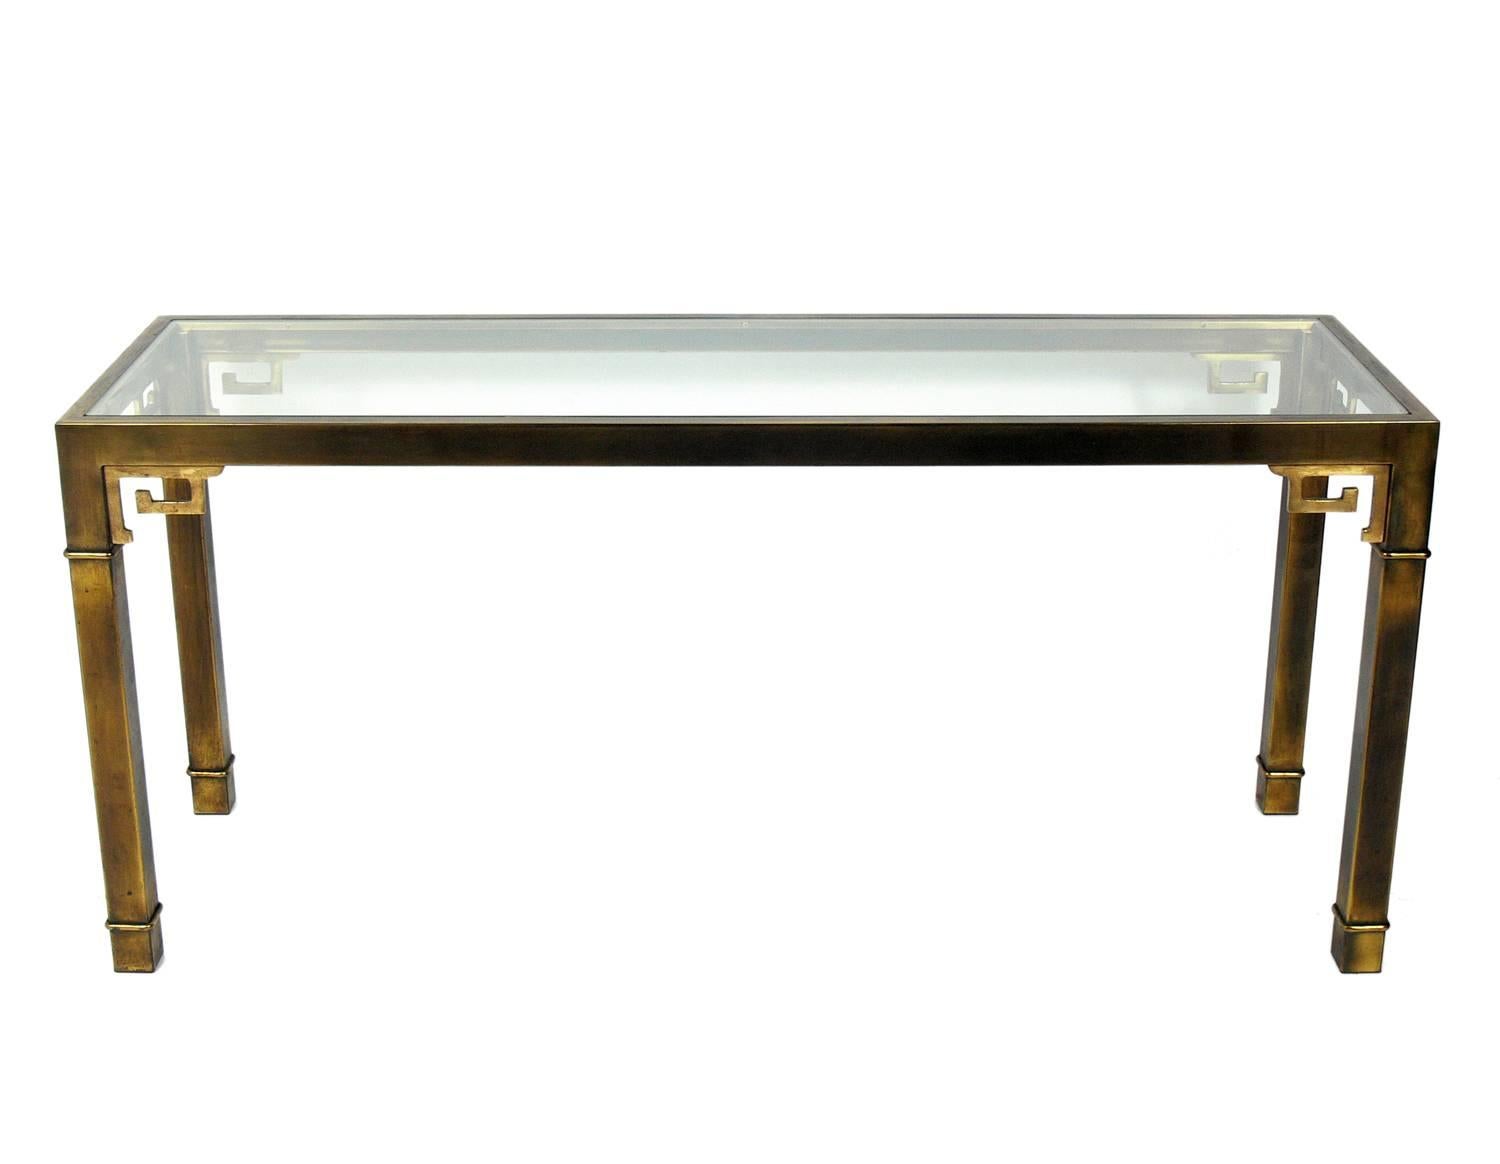 Asian Influenced brass console table by Mastercraft, American, circa 1960s. Retains warm original patina. This piece is a versatile size and can be used as a console table, desk, vanity, or bar.